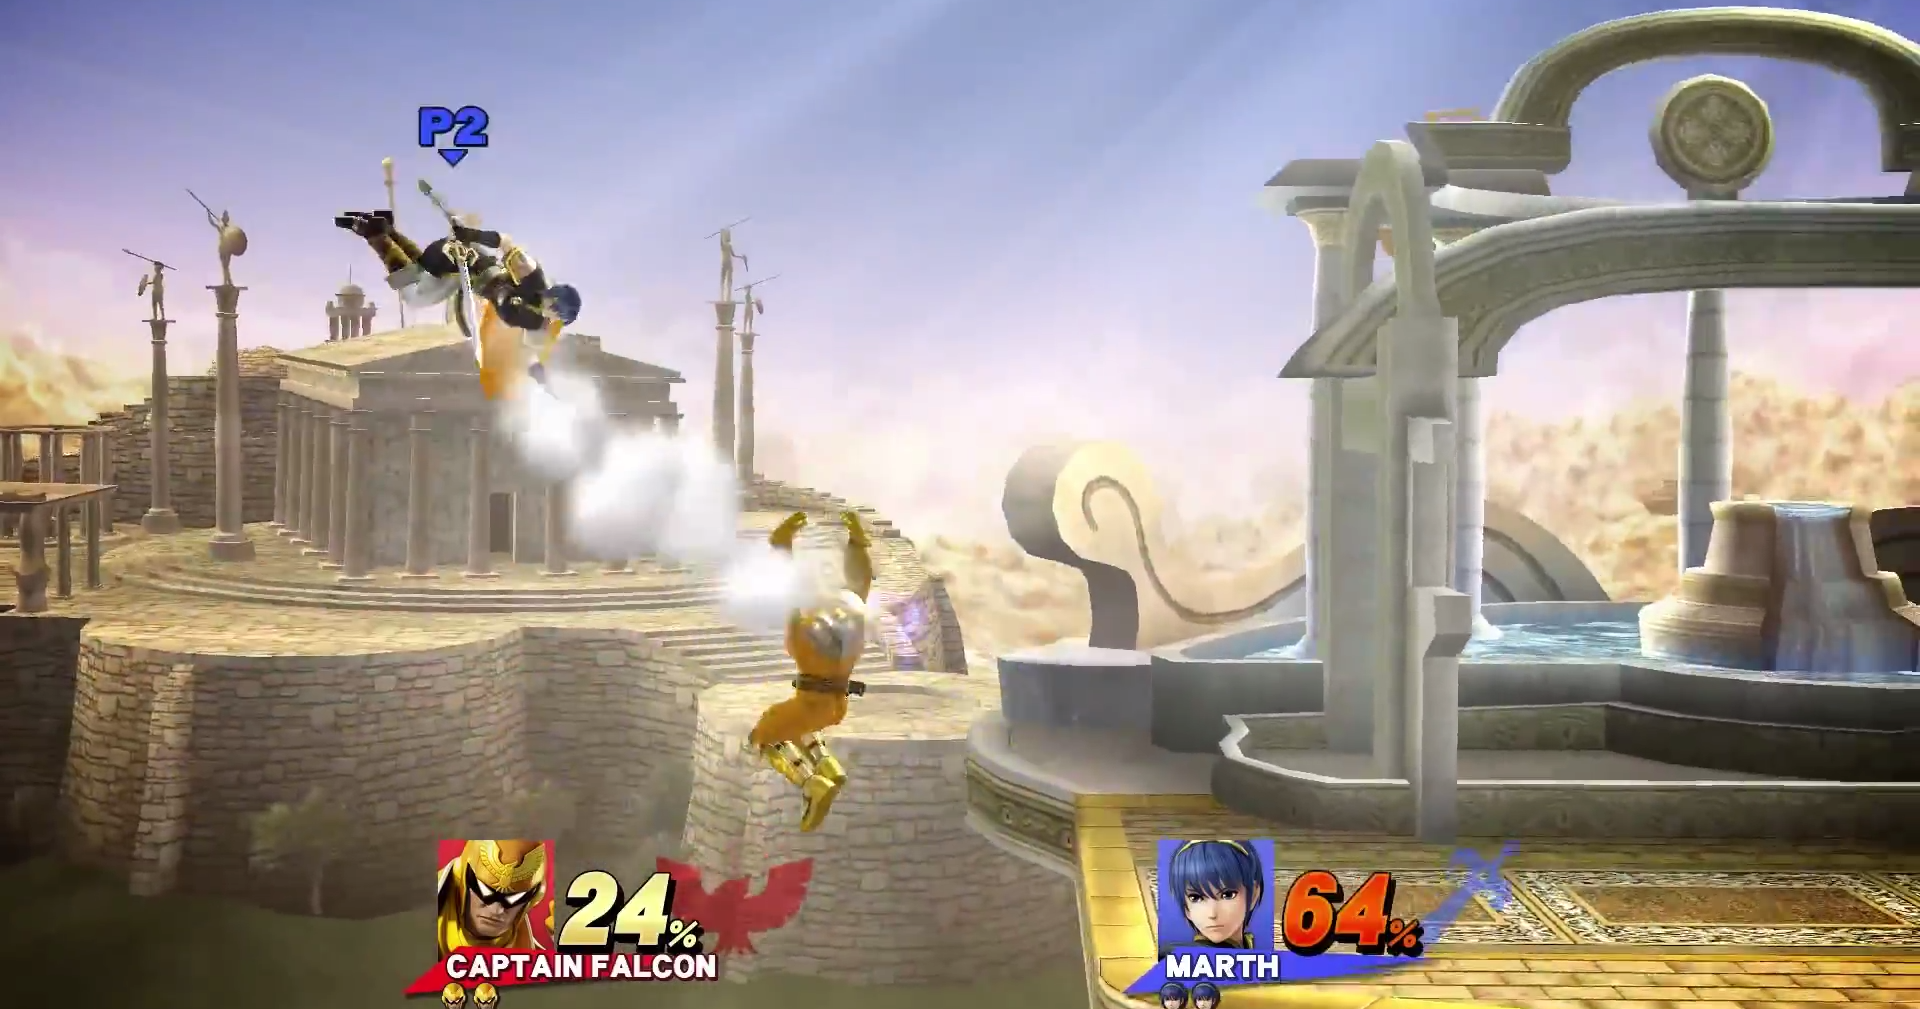 What ‘Zoning’ Means In Smash Bros, And Why It’s So Important